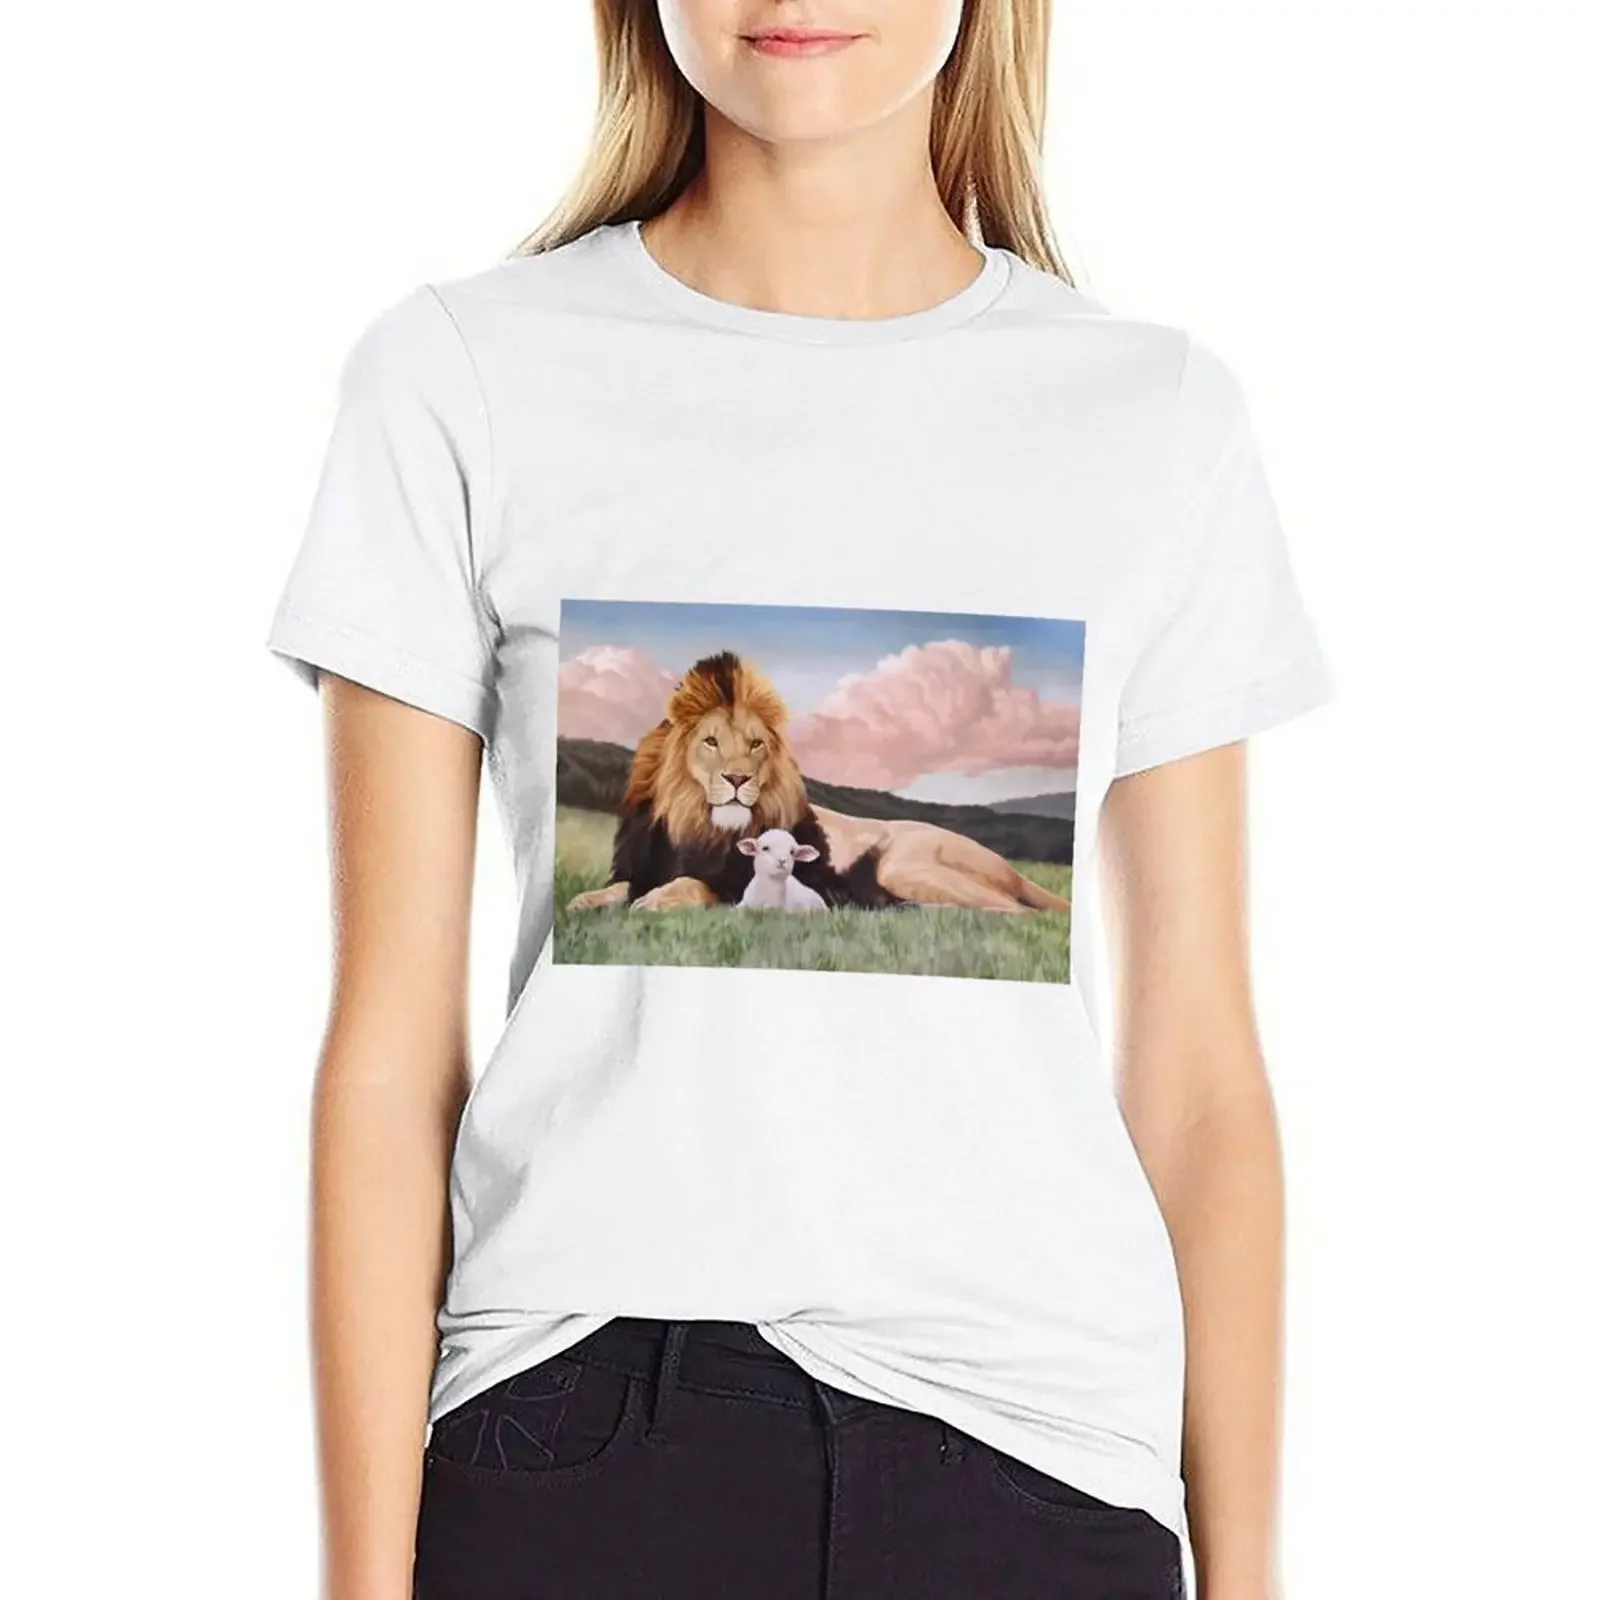 

The Lion and the Lamb T-shirt Short sleeve tee Aesthetic clothing tops Women